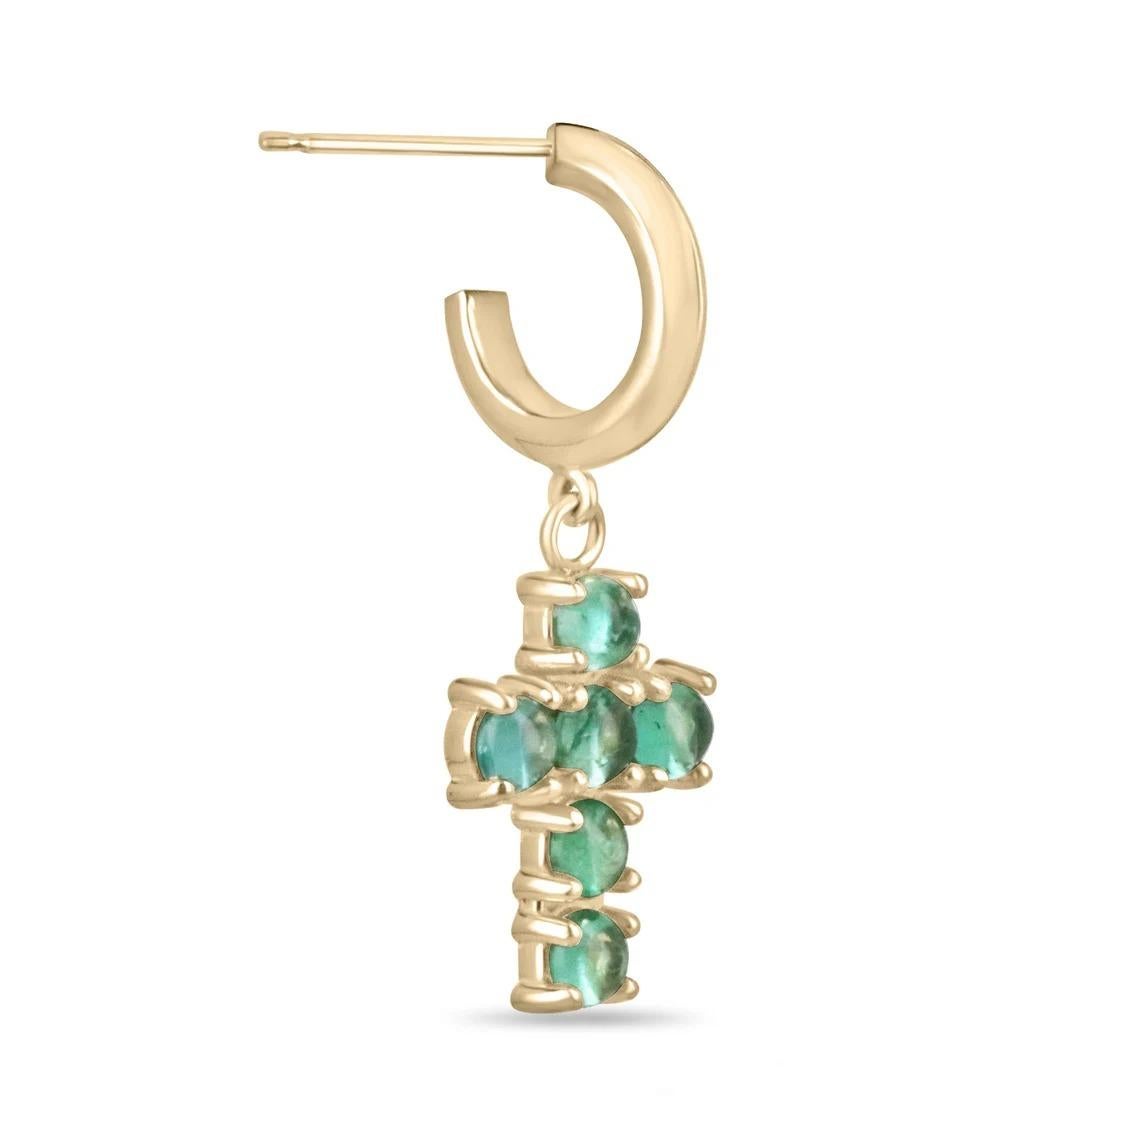 These emerald dangle cross earrings showcase stunning medium light green round cut cabochon emeralds. The emeralds are beautifully set in a cross-shaped setting, securely held in place by prongs. Crafted in 14k gold, these earrings combine elegance